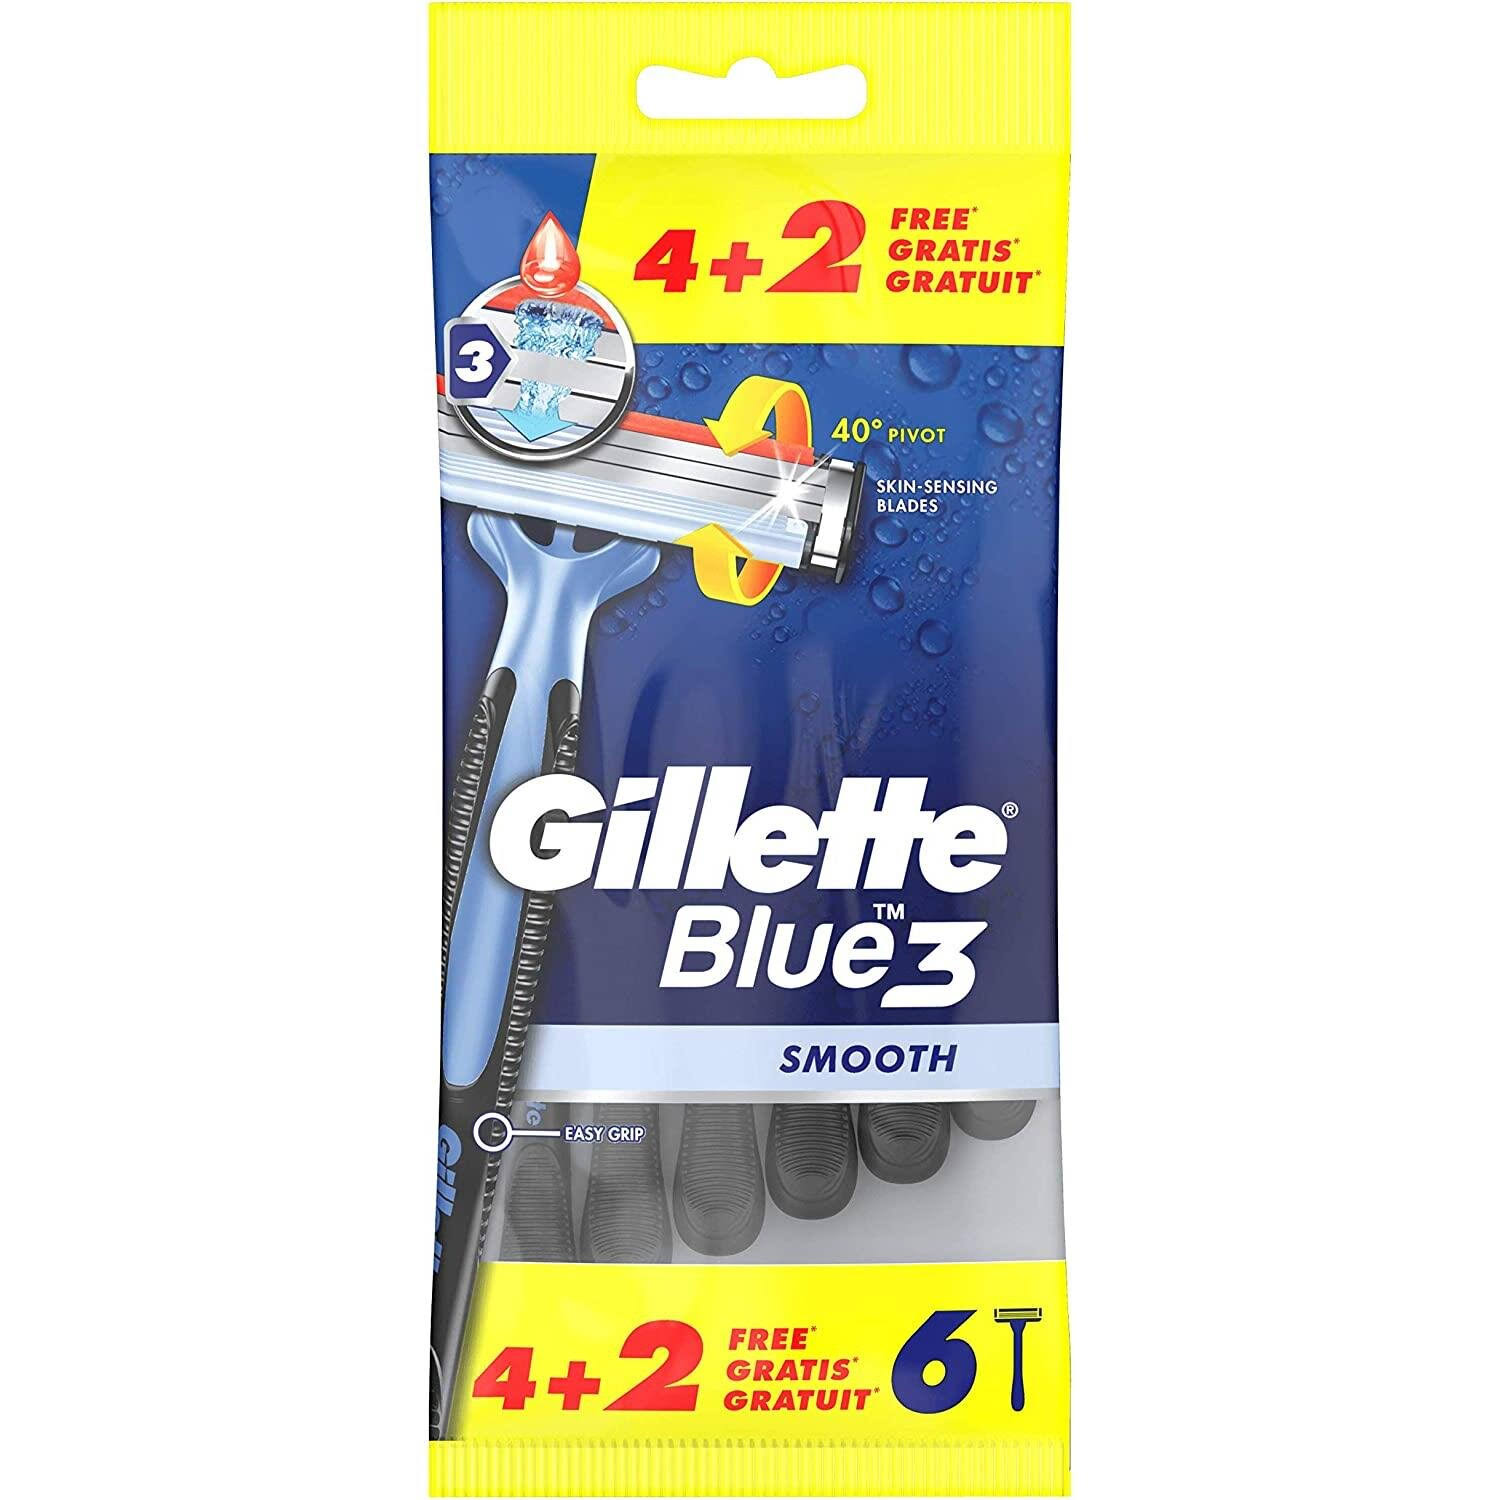 Gillette Blue 3 Smooth Disposable Razors 6 Pack